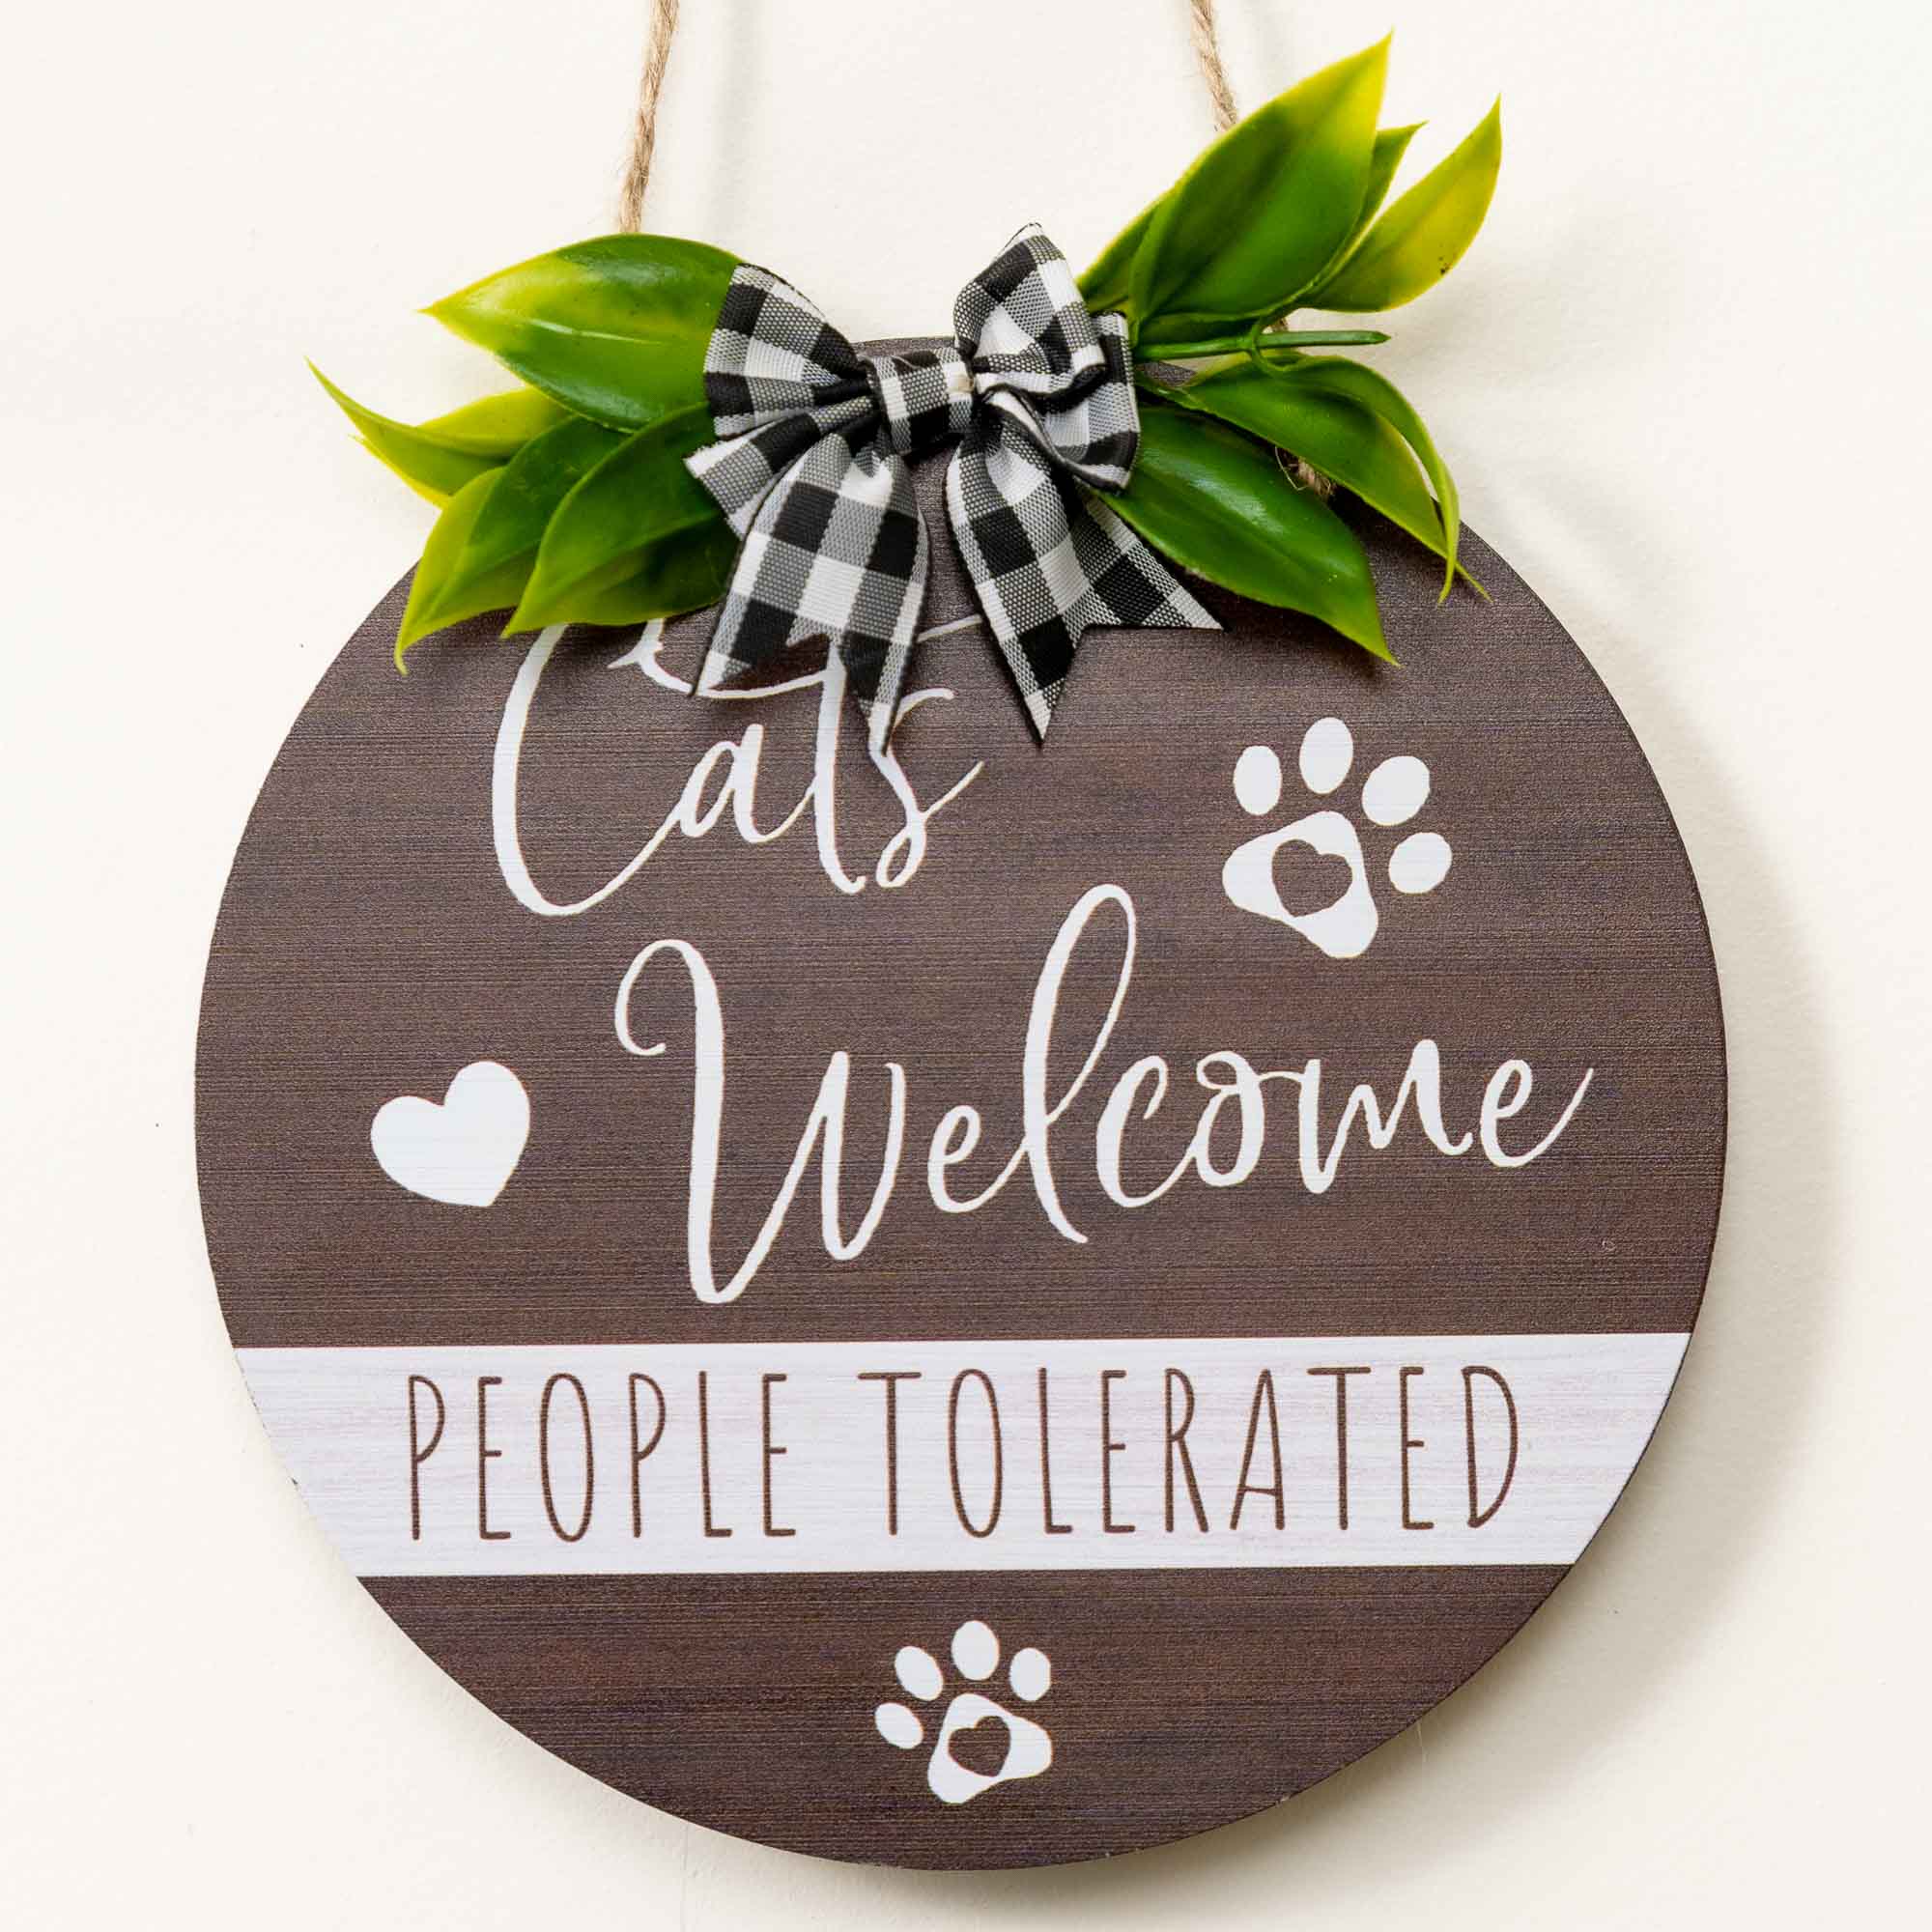 Limited Time Offer - Cats Welcome People Tolerated  - Home Decor Hanging Sign for Cat Lovers !  Savings 60%